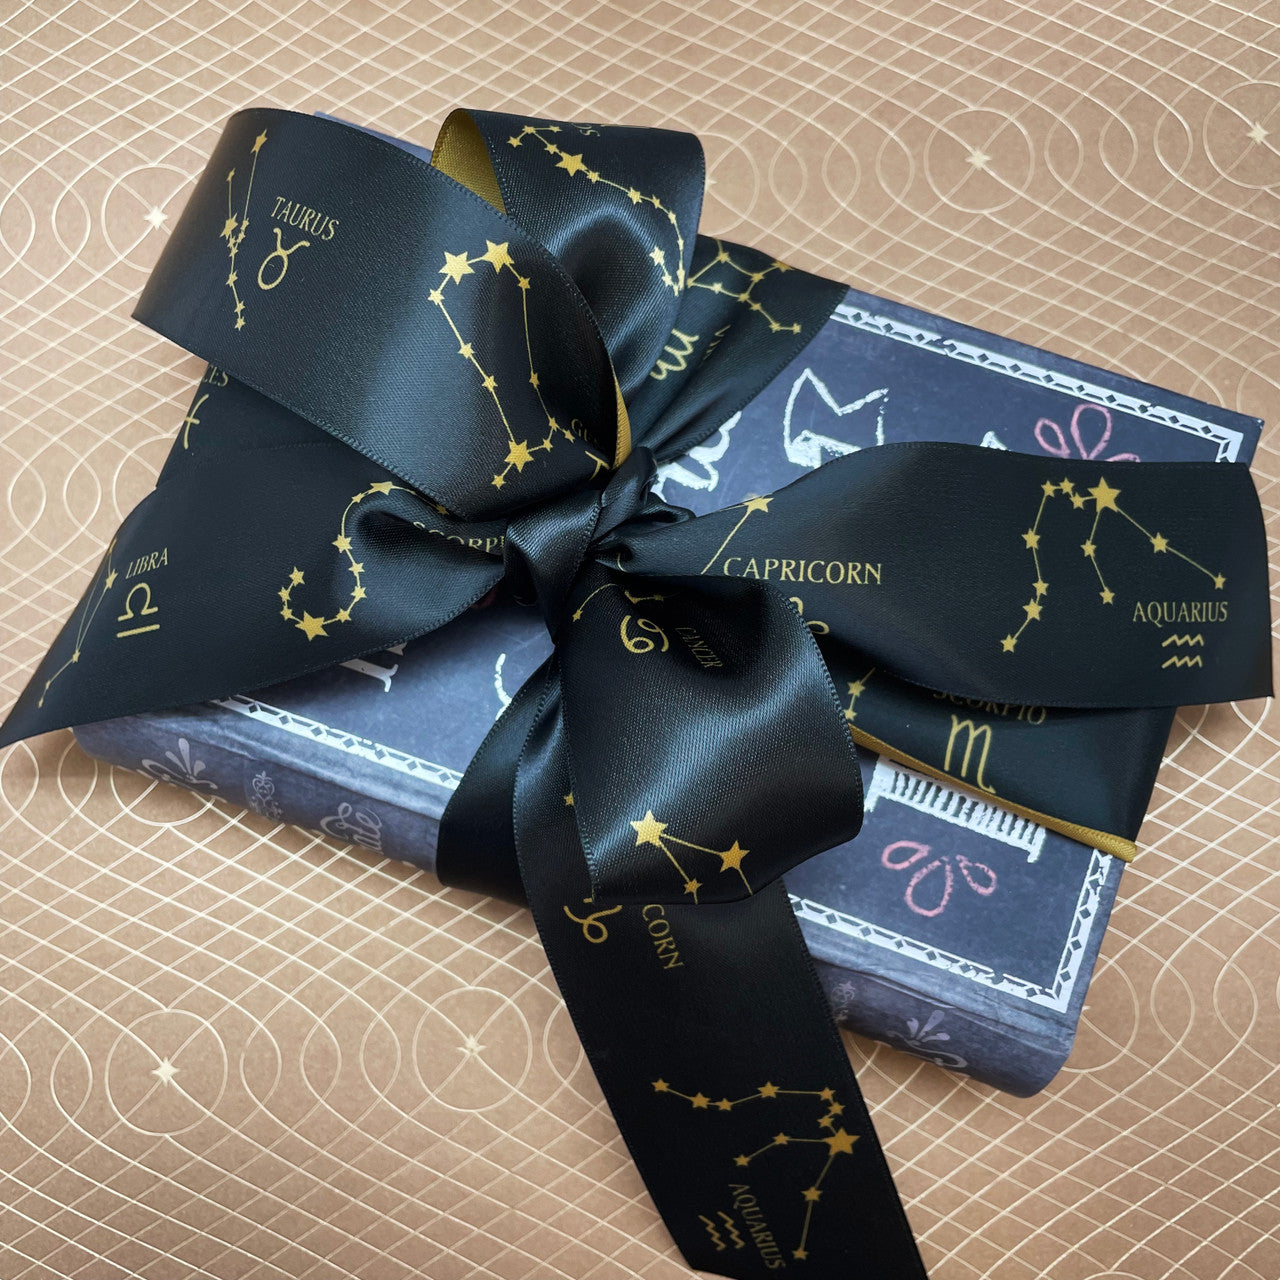 This luxurious ribbon ties a beautiful bow for gifts, wreaths and party decor for any astrology lover!